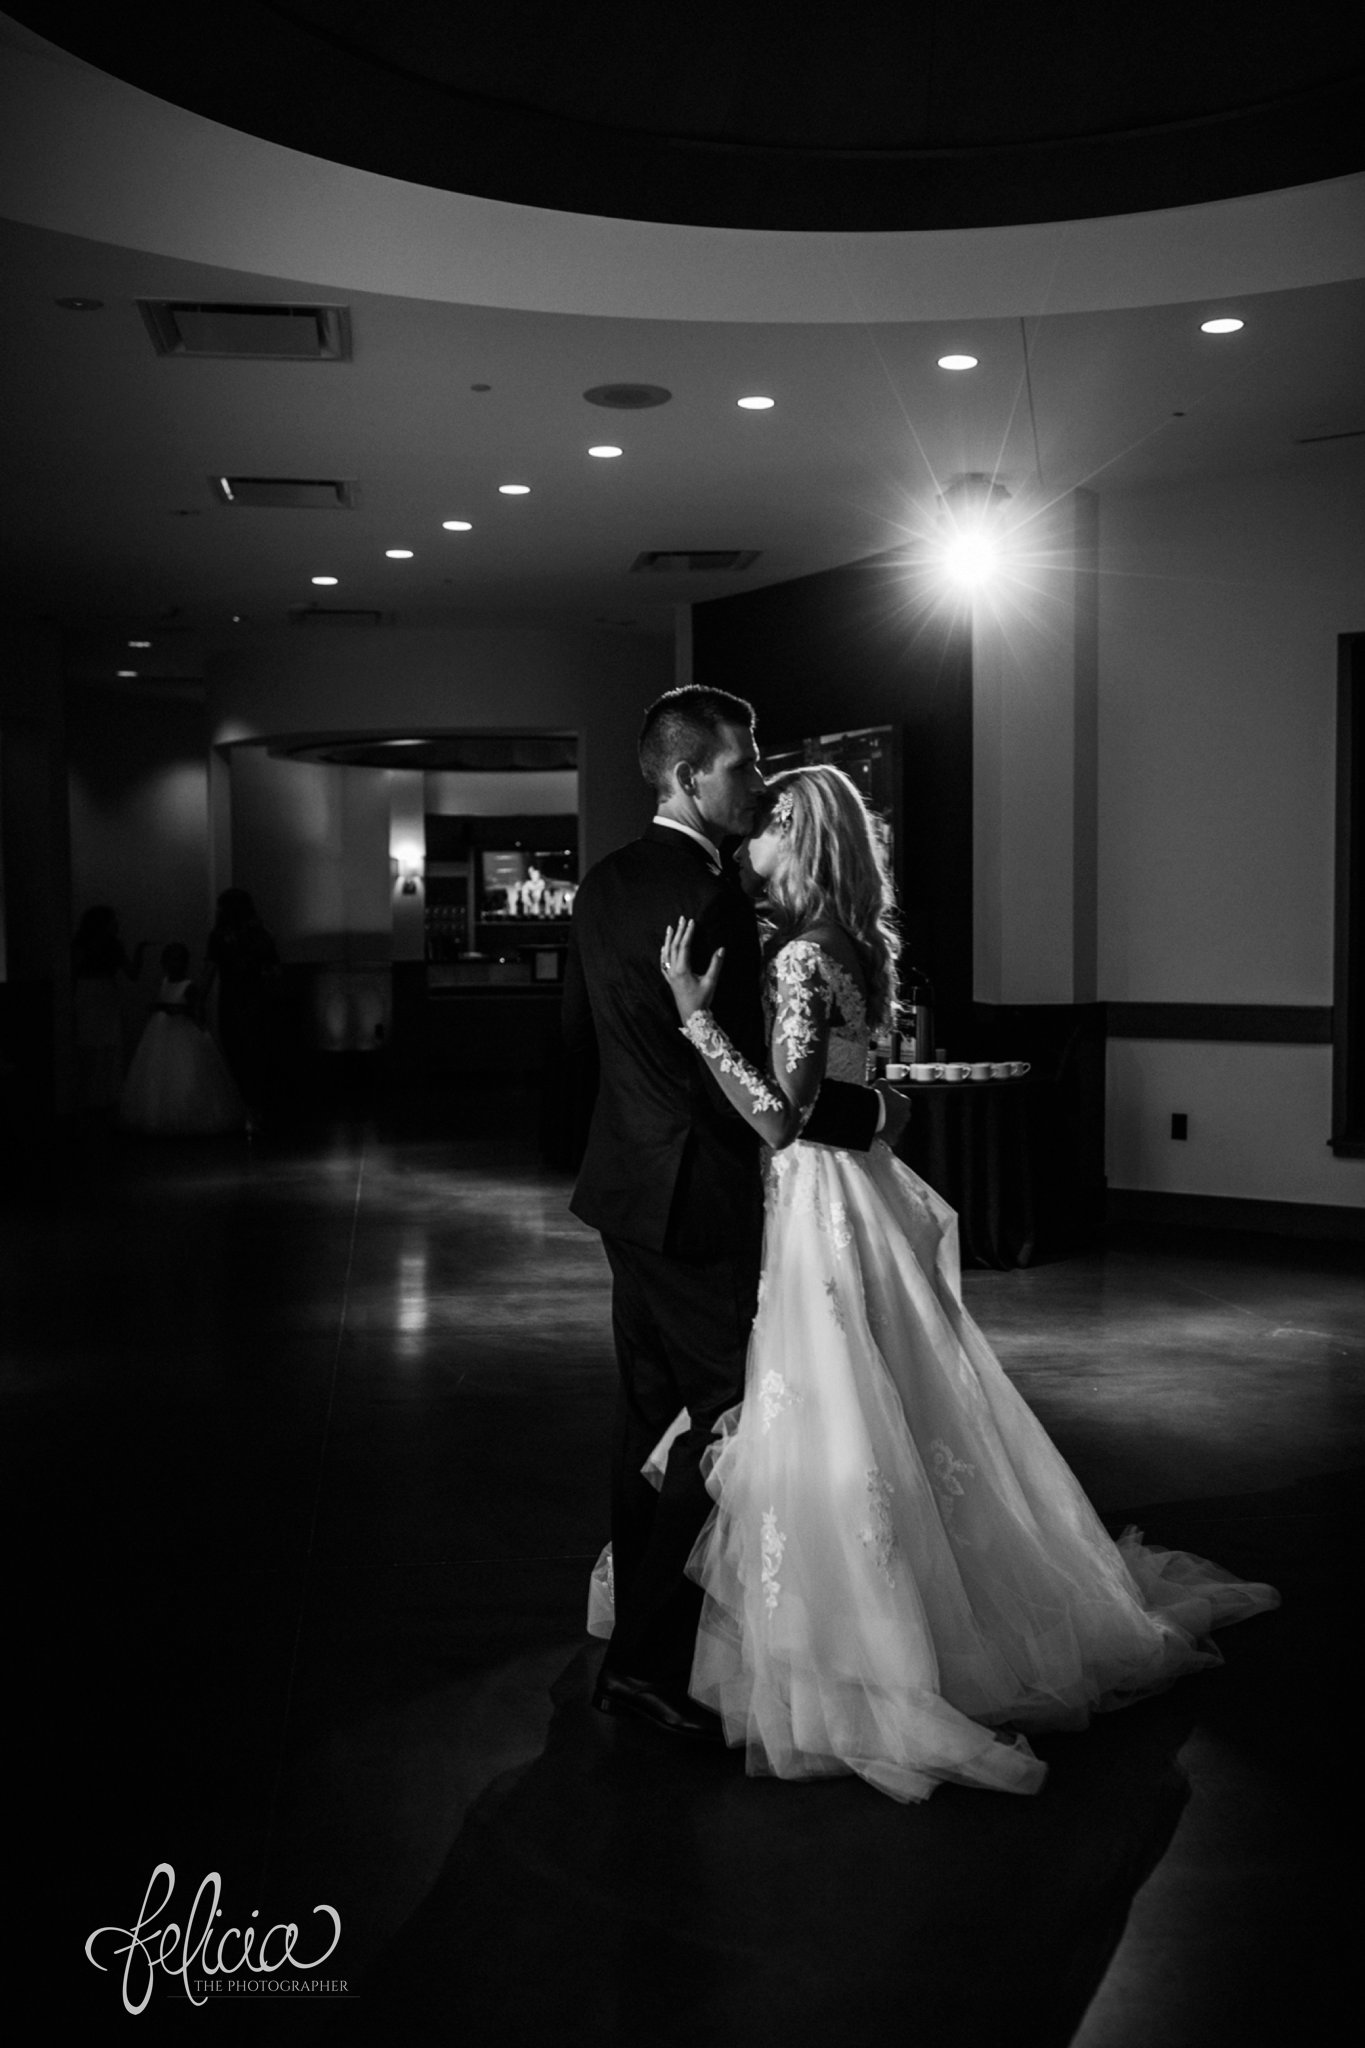 images by feliciathephotographer.com | wedding photographer | kansas city | redemptorist | classic | black and white | first dance | reception | romantic | royal room | lace long sleeve dress | belle vogue | whimsical | 